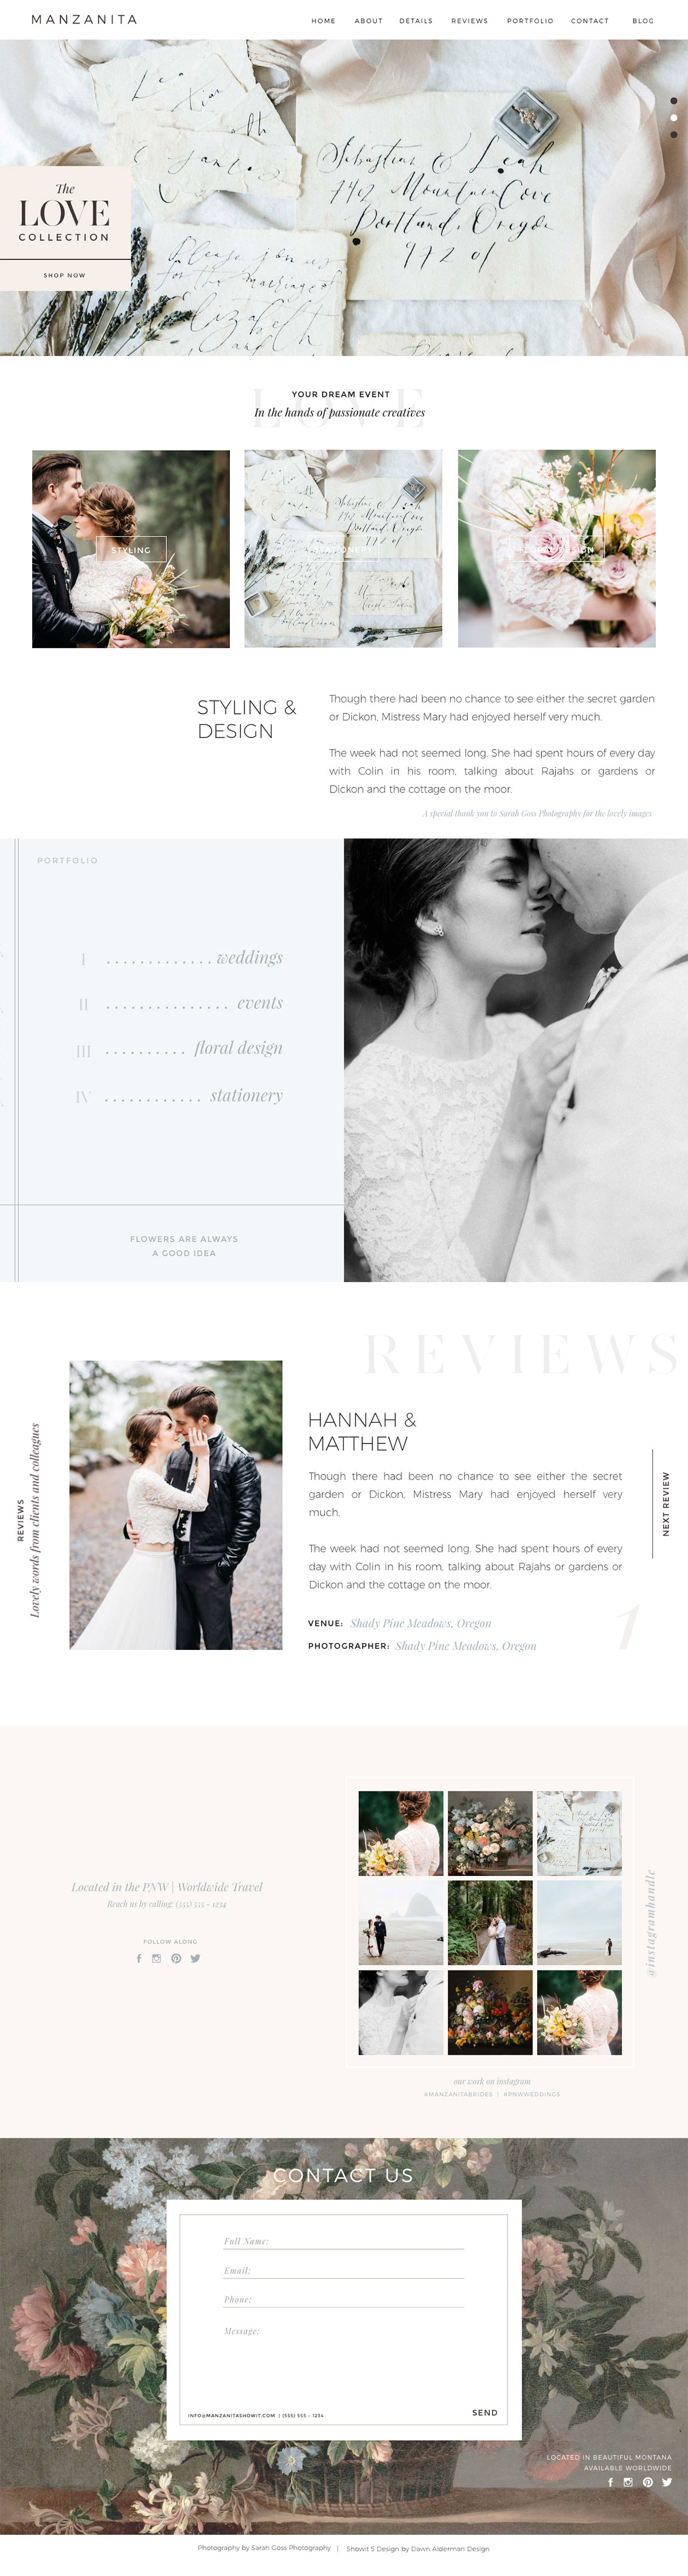  wedding professionals, stationers, artists, creative bloggers and photographer website. Design by Dawn Alderman for Showit